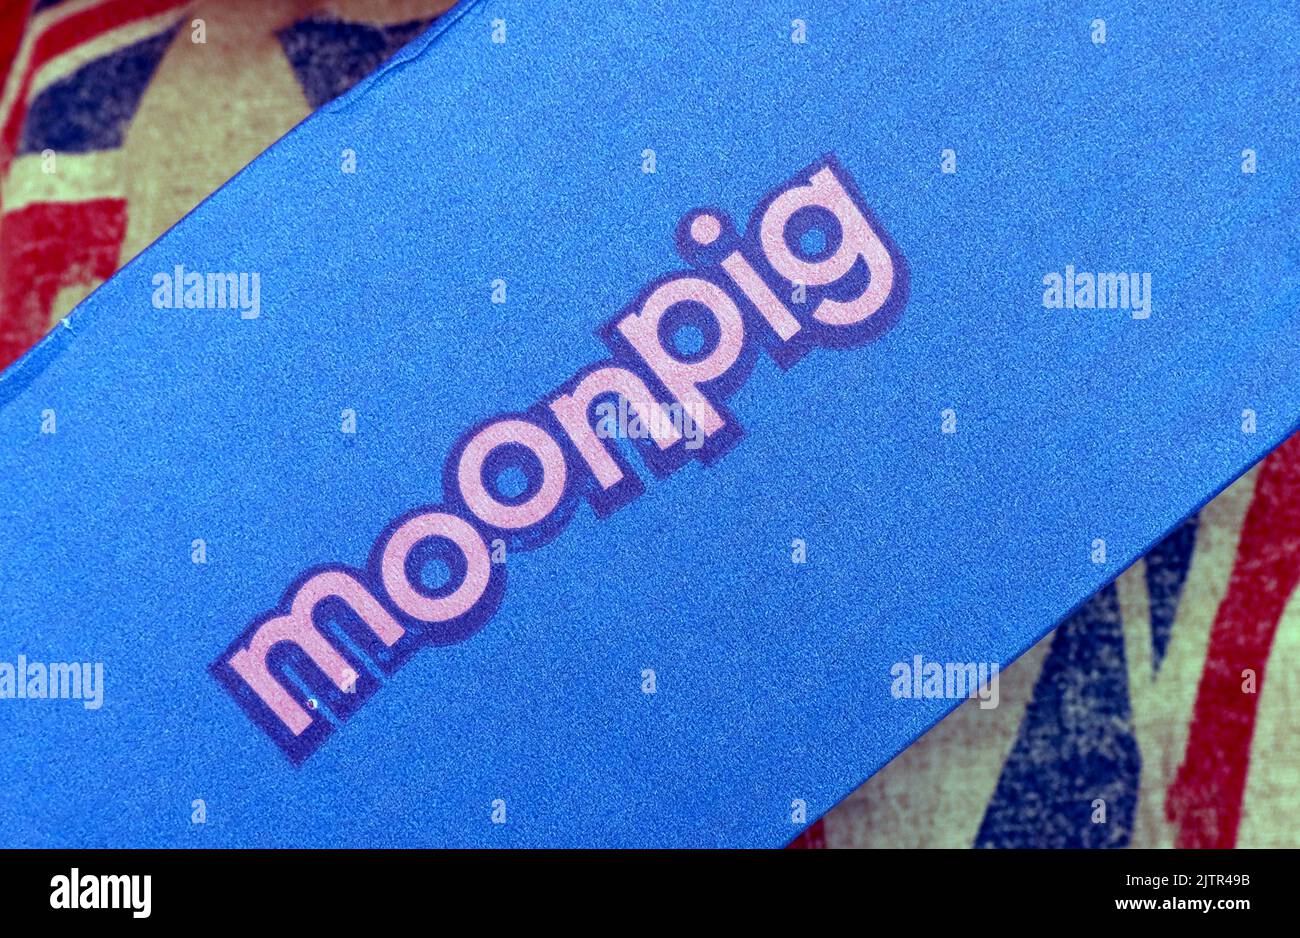 Moonpig delivery package - Delivery for Someone very special, card and gift. Blue and pink packaging Stock Photo